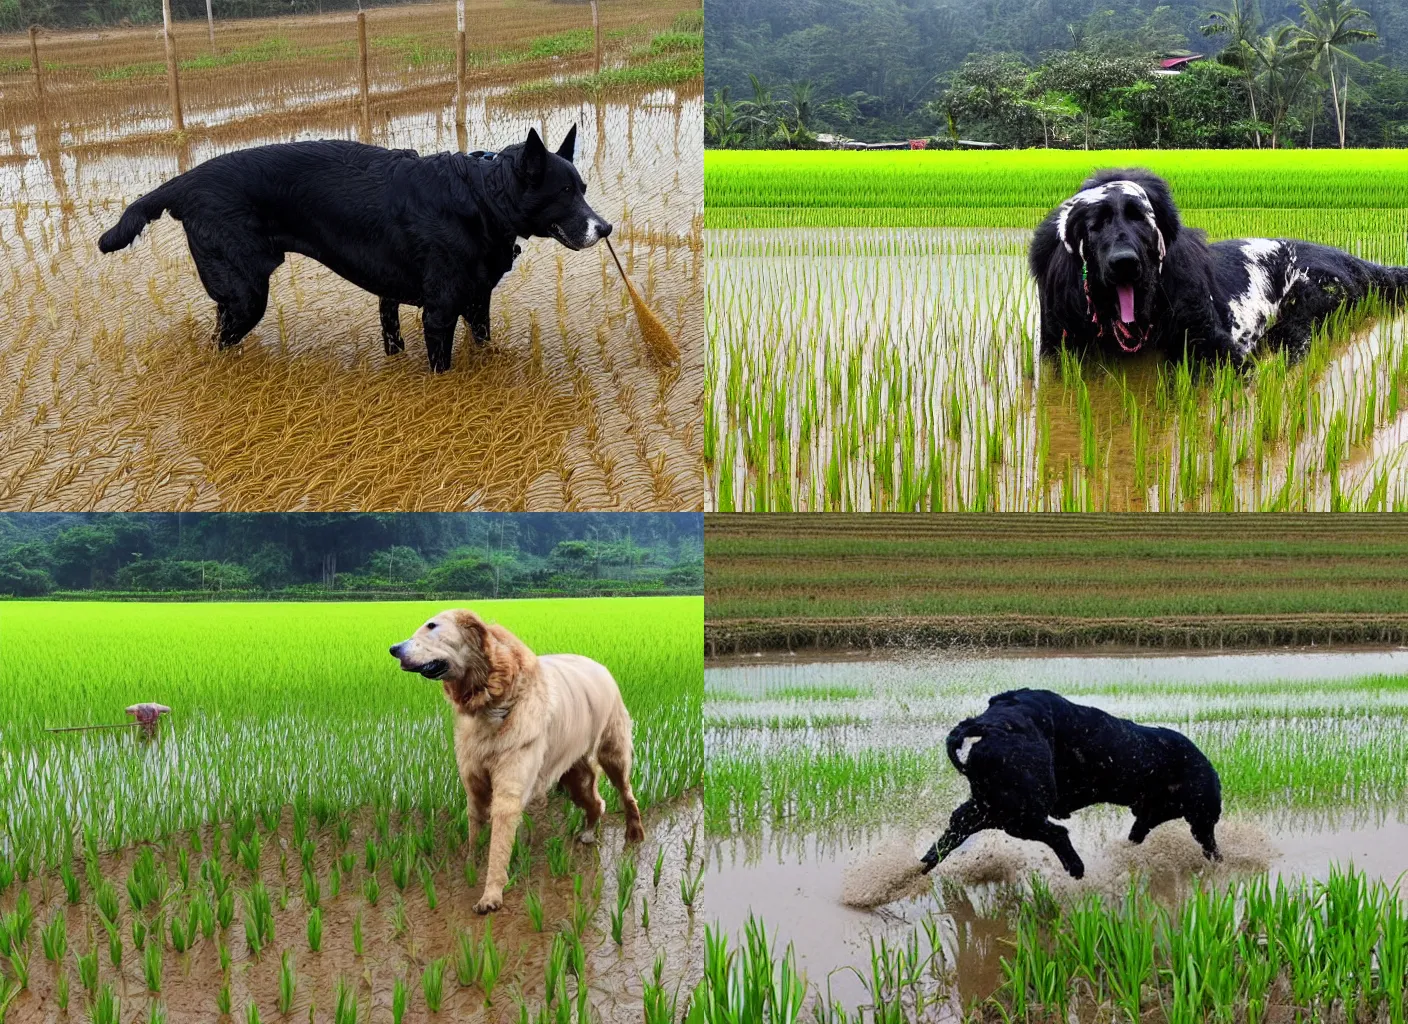 Prompt: photo, A large dog Planting Rice in a paddy field.